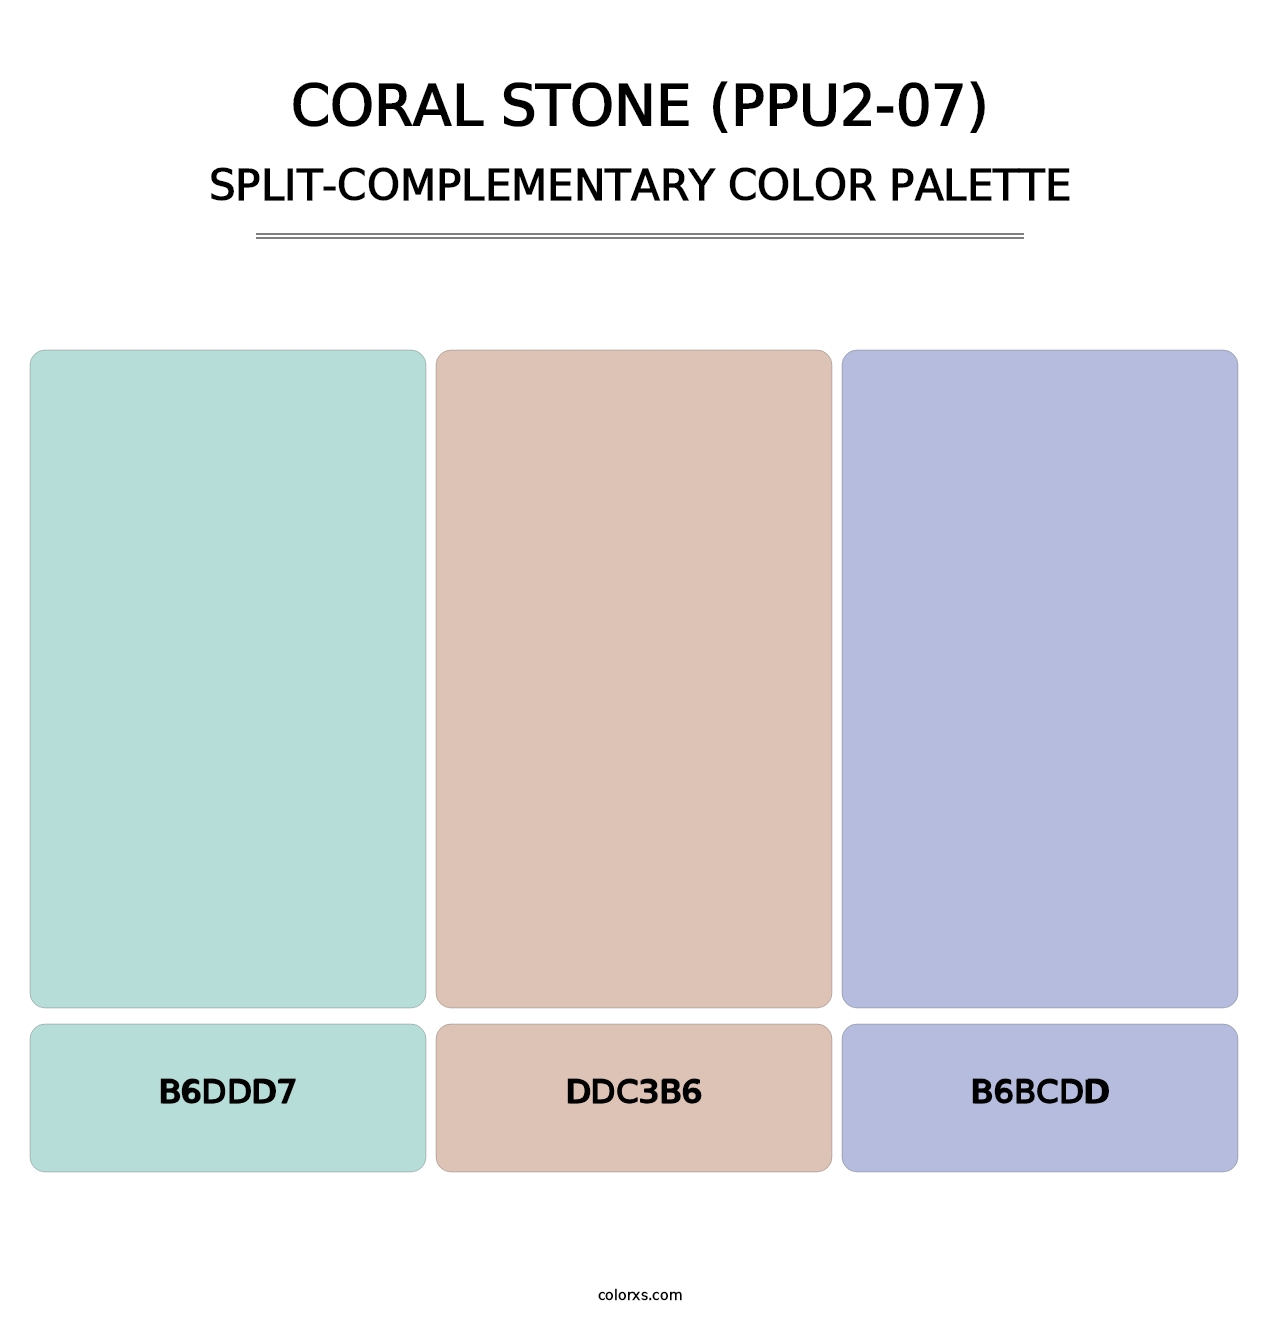 Coral Stone (PPU2-07) - Split-Complementary Color Palette